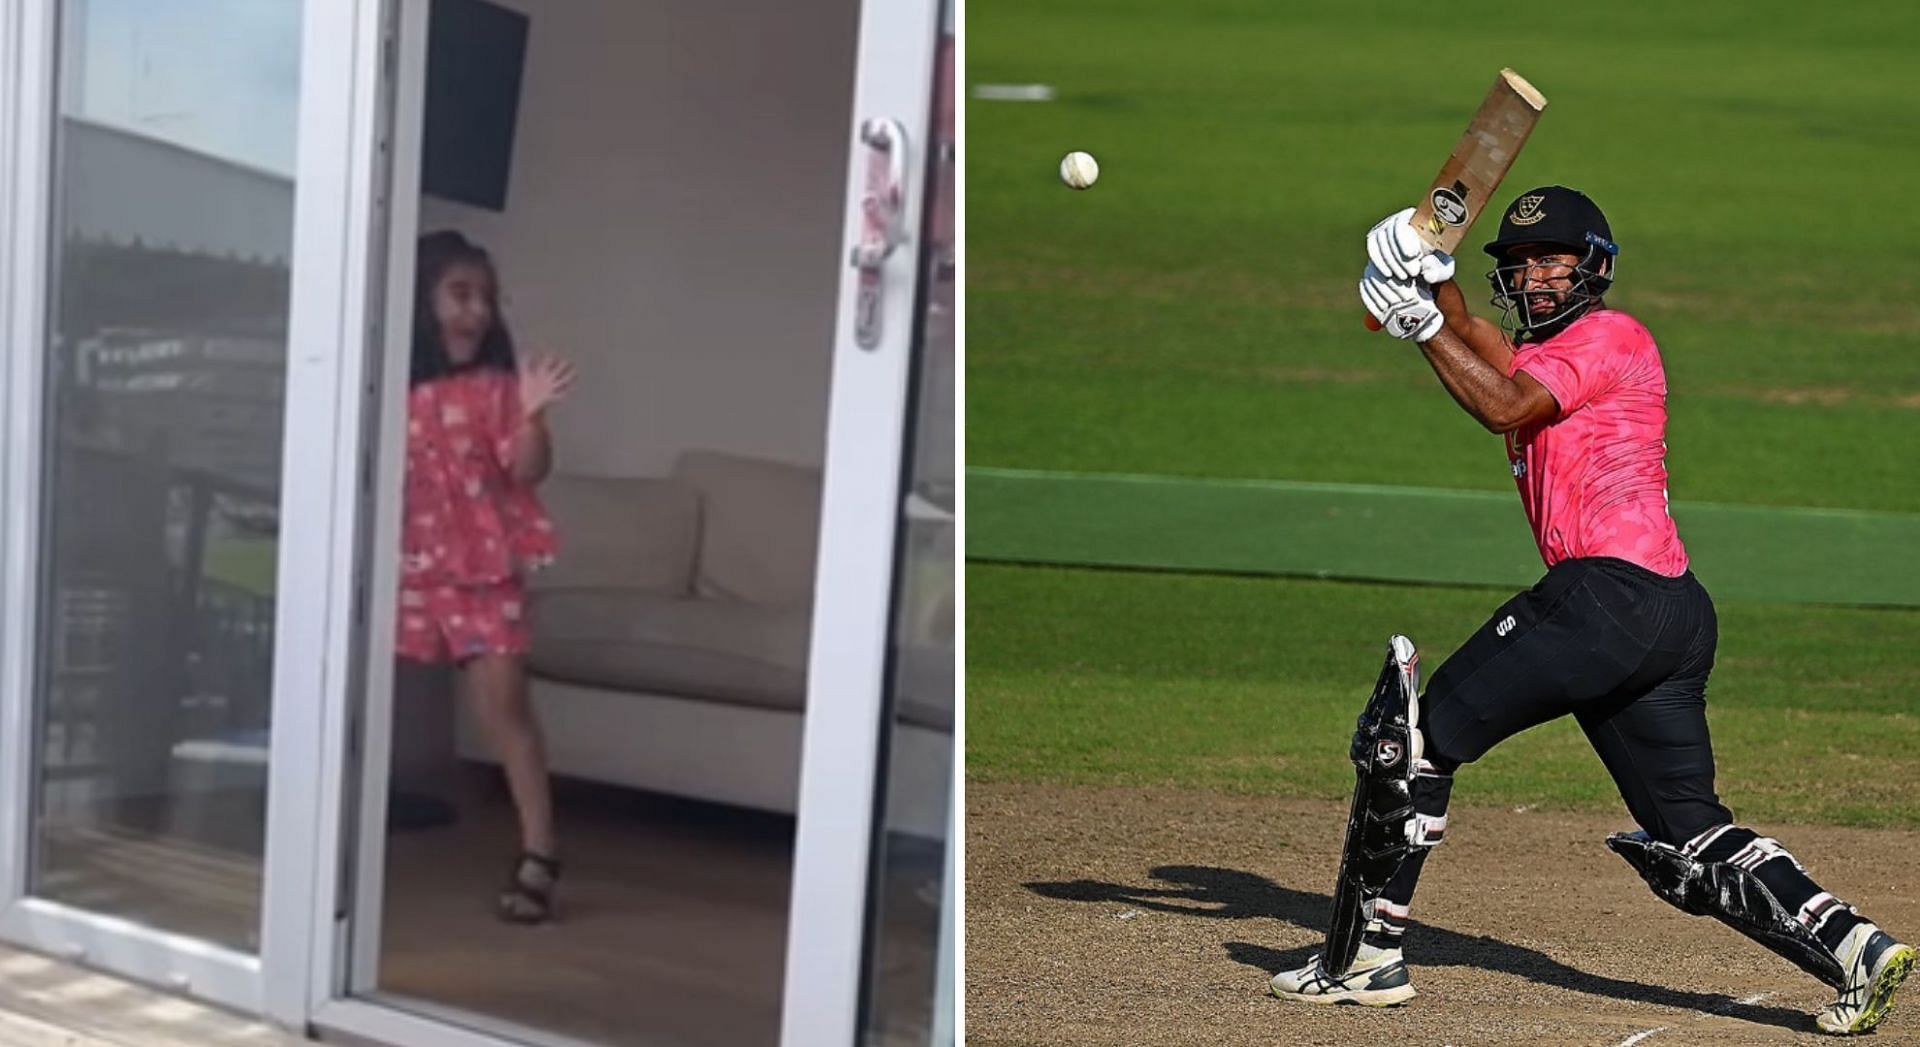 Aditi couldn&#039;t stop herself from dancing after another Pujara ton in county cricket. Pic credits: ChP1v3Nqps4/Instagram]